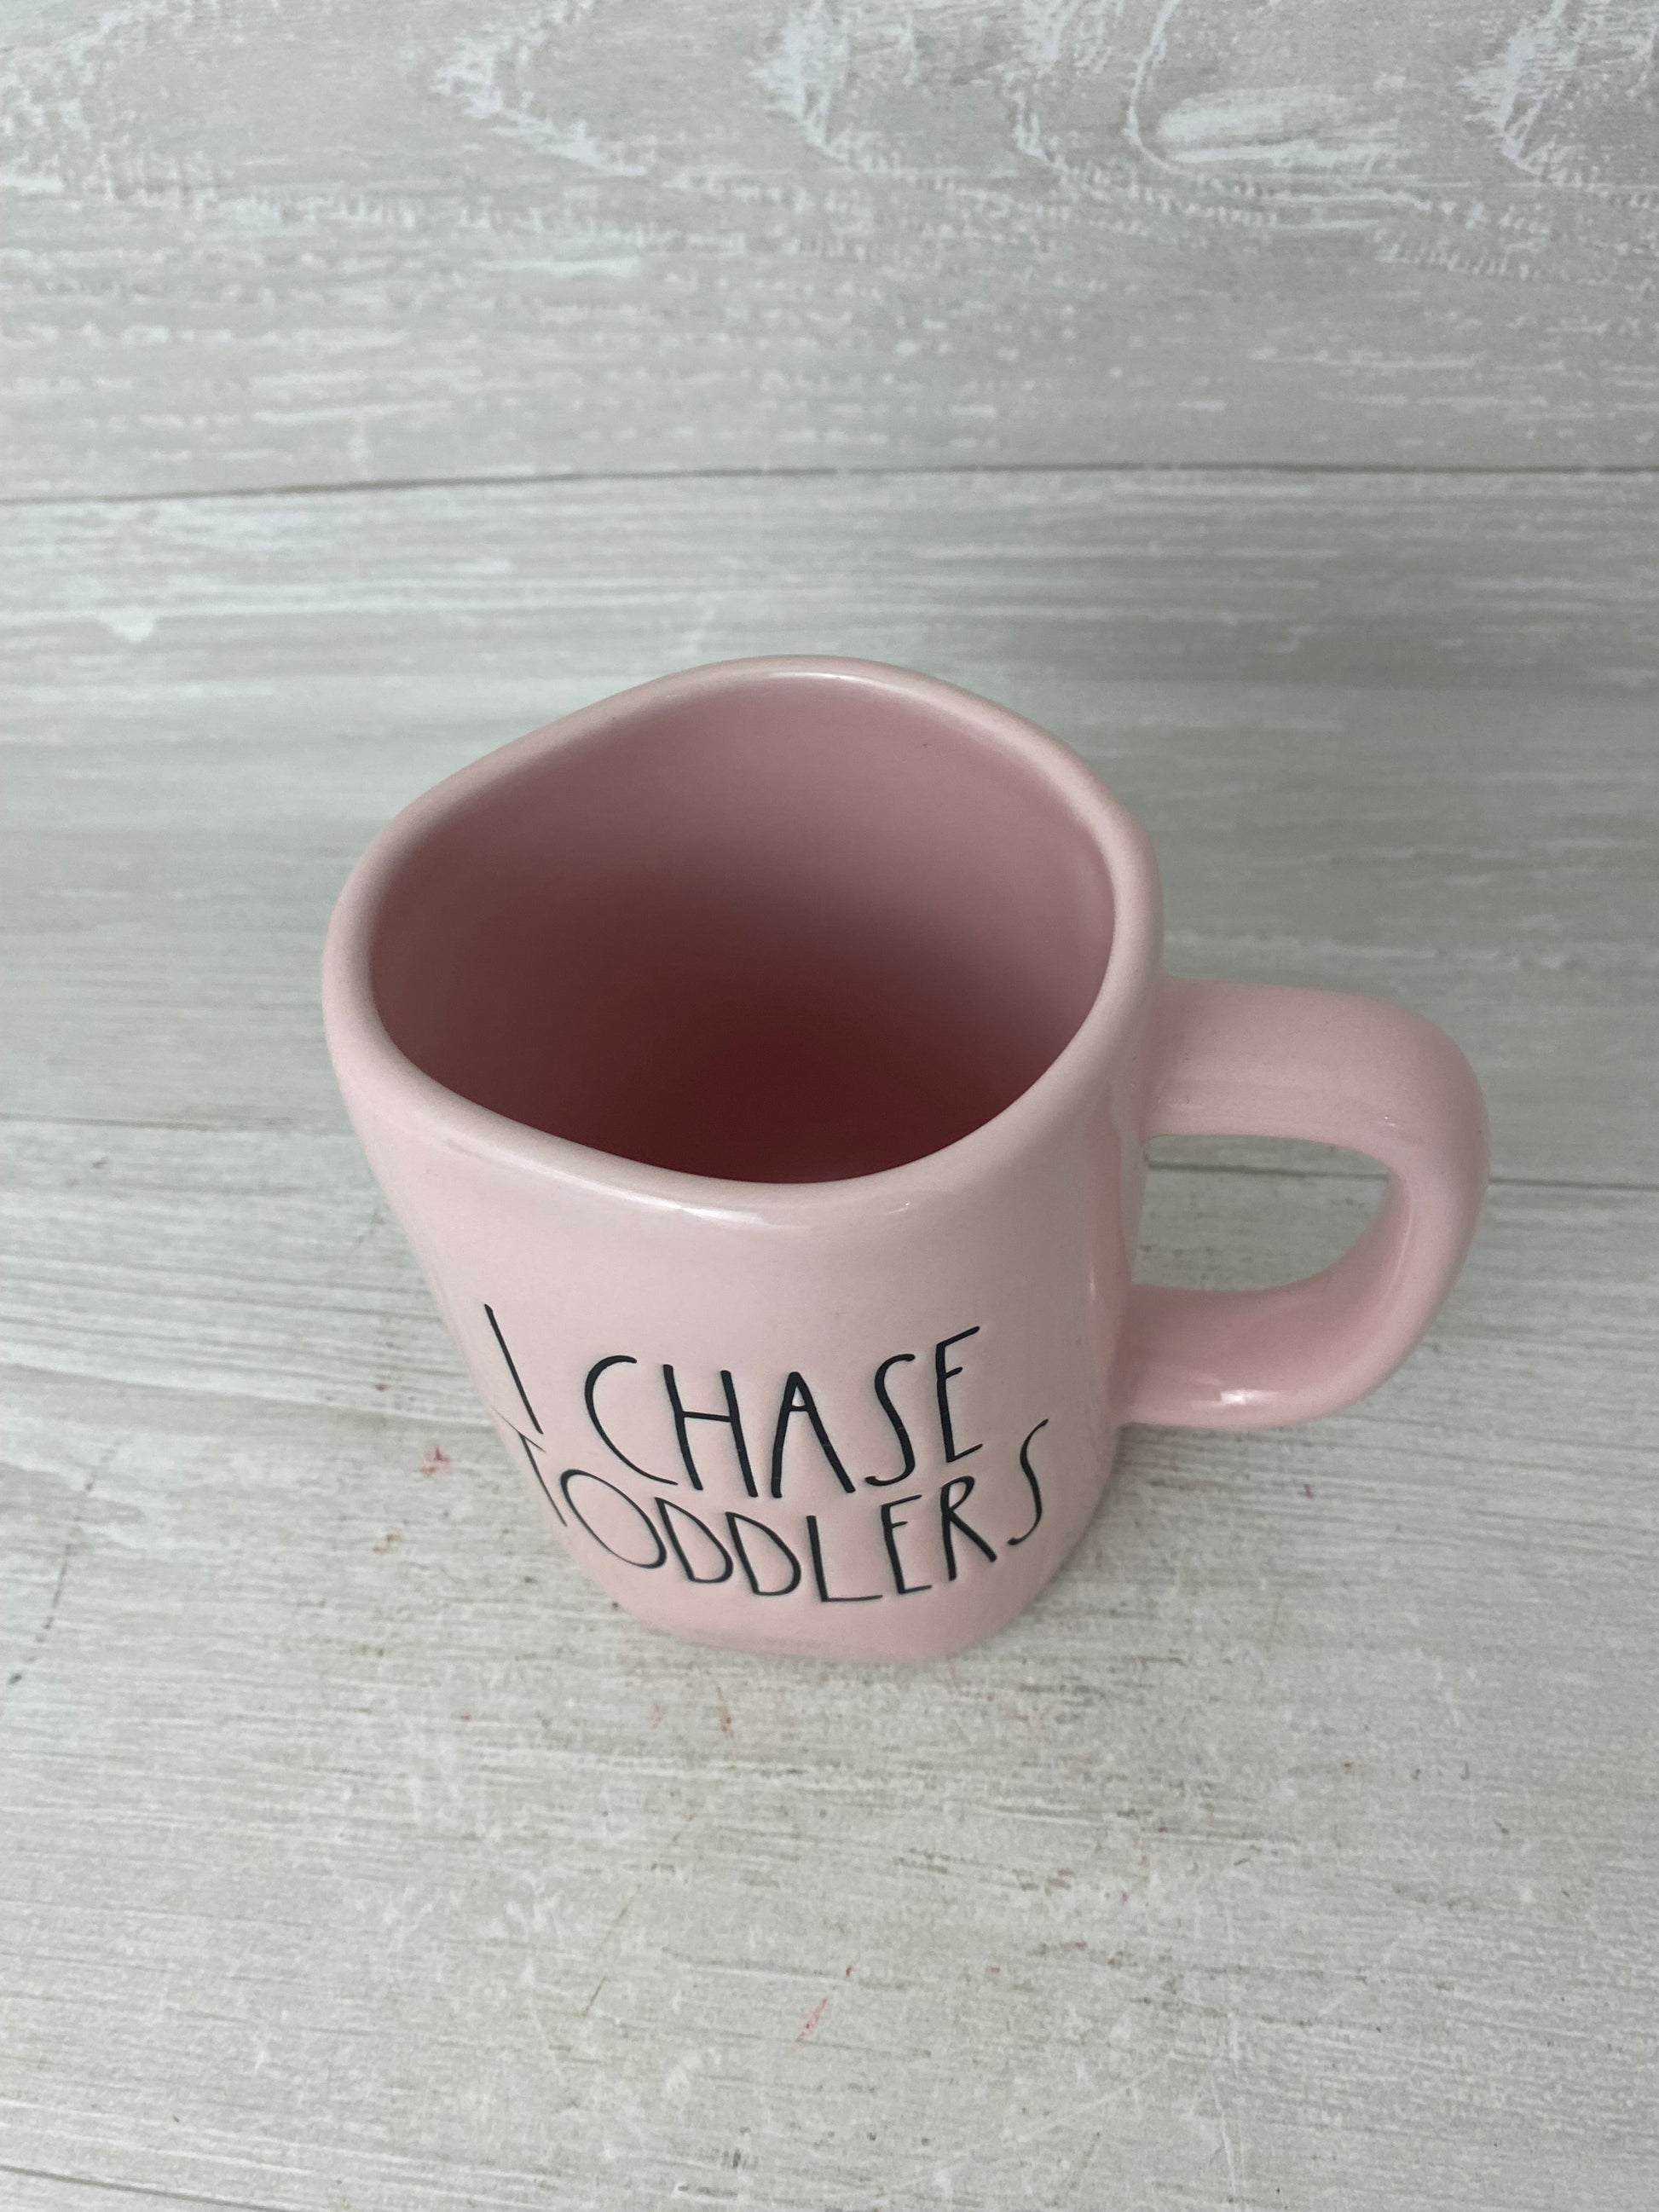 Yes I Workout. I Chase Toddlers. Funny Coffee Mug for Parents or